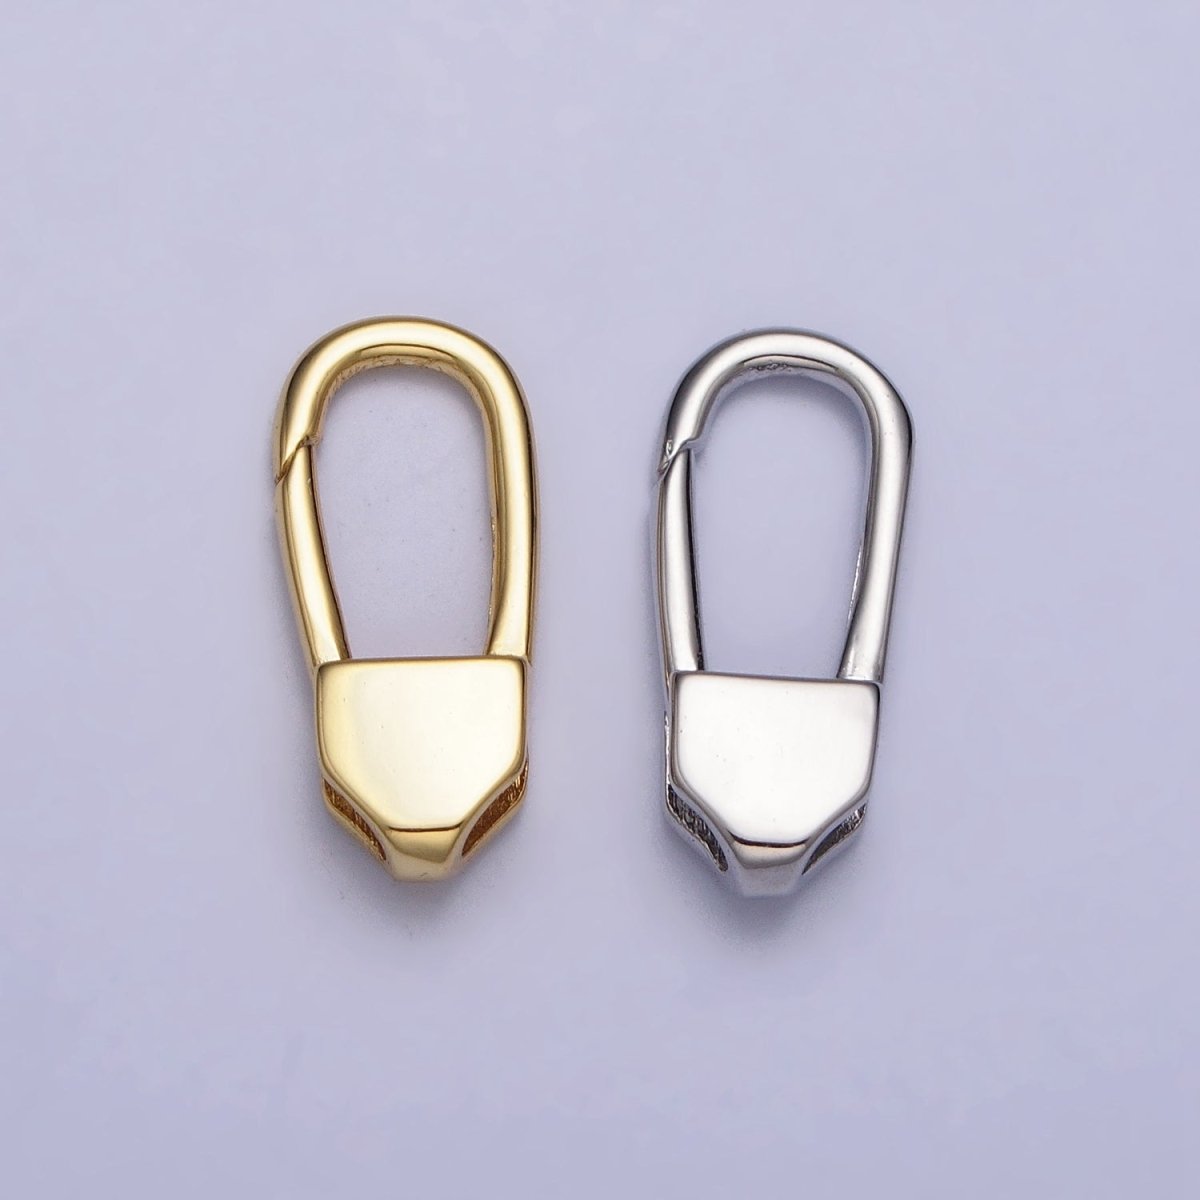 24K Gold Filled 17mm Long Oblong Triggerless Push Closure Supply in Gold & Silver | Z-115 Z-116 - DLUXCA